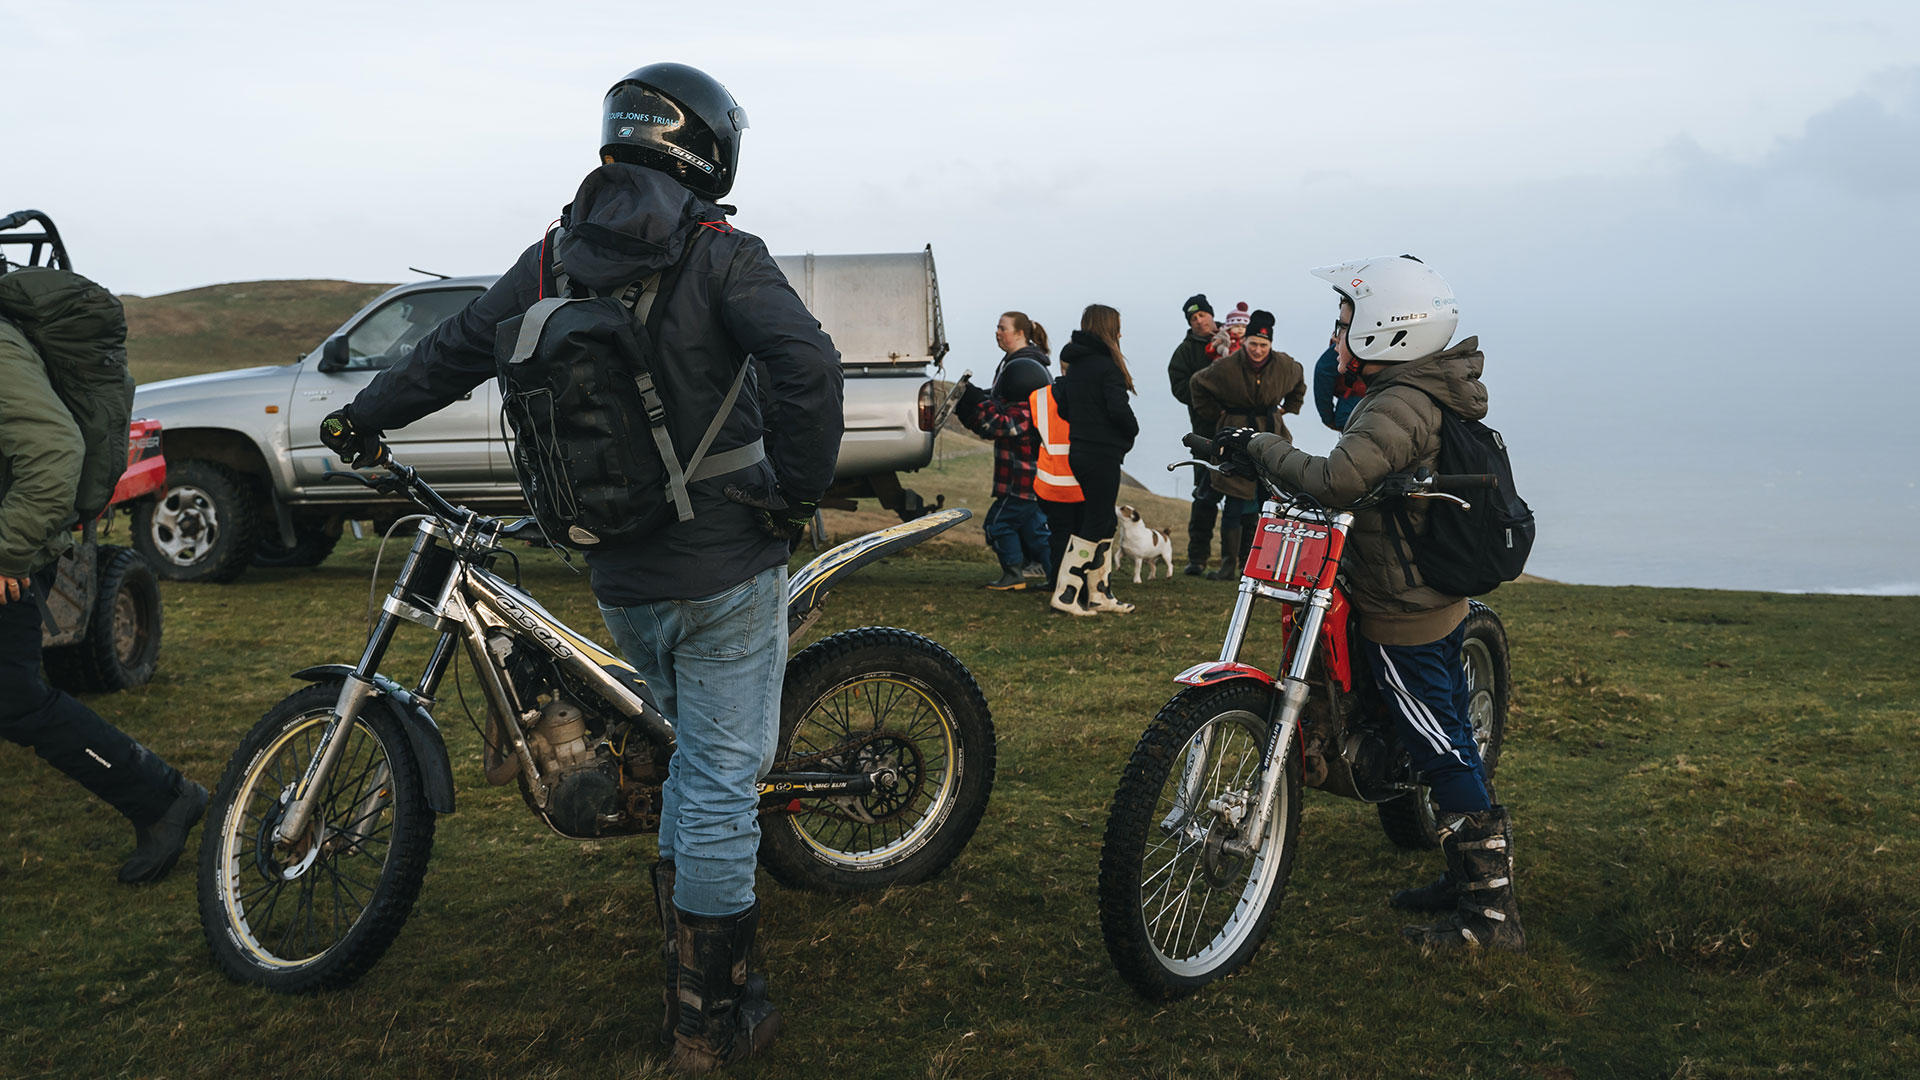 Young farmers on their motorbikes taking part in the Carneddau Pony gathering